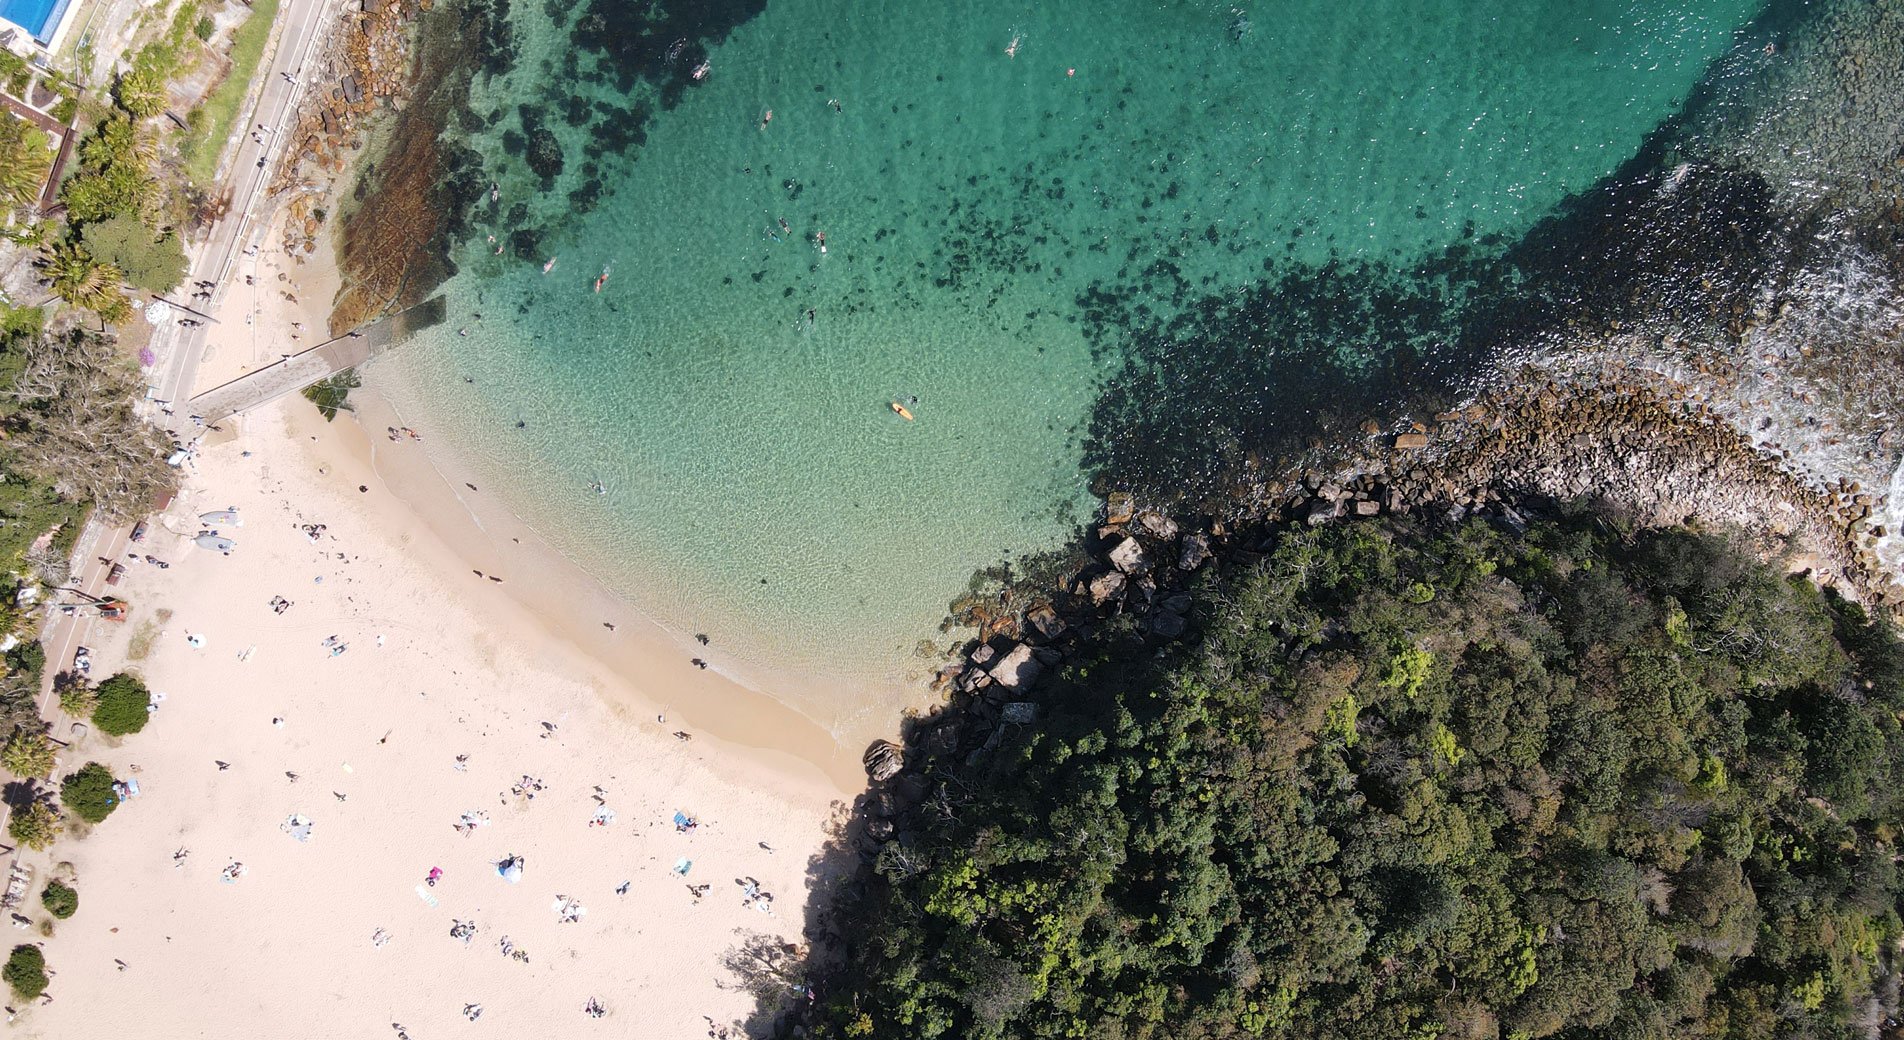 drone shot of shelly beach. bottom half of image has sand with beach goers laying on sand scattered across, as well as headland with bush. top half has clear blue water where you can see people swimming and rocks underneath.